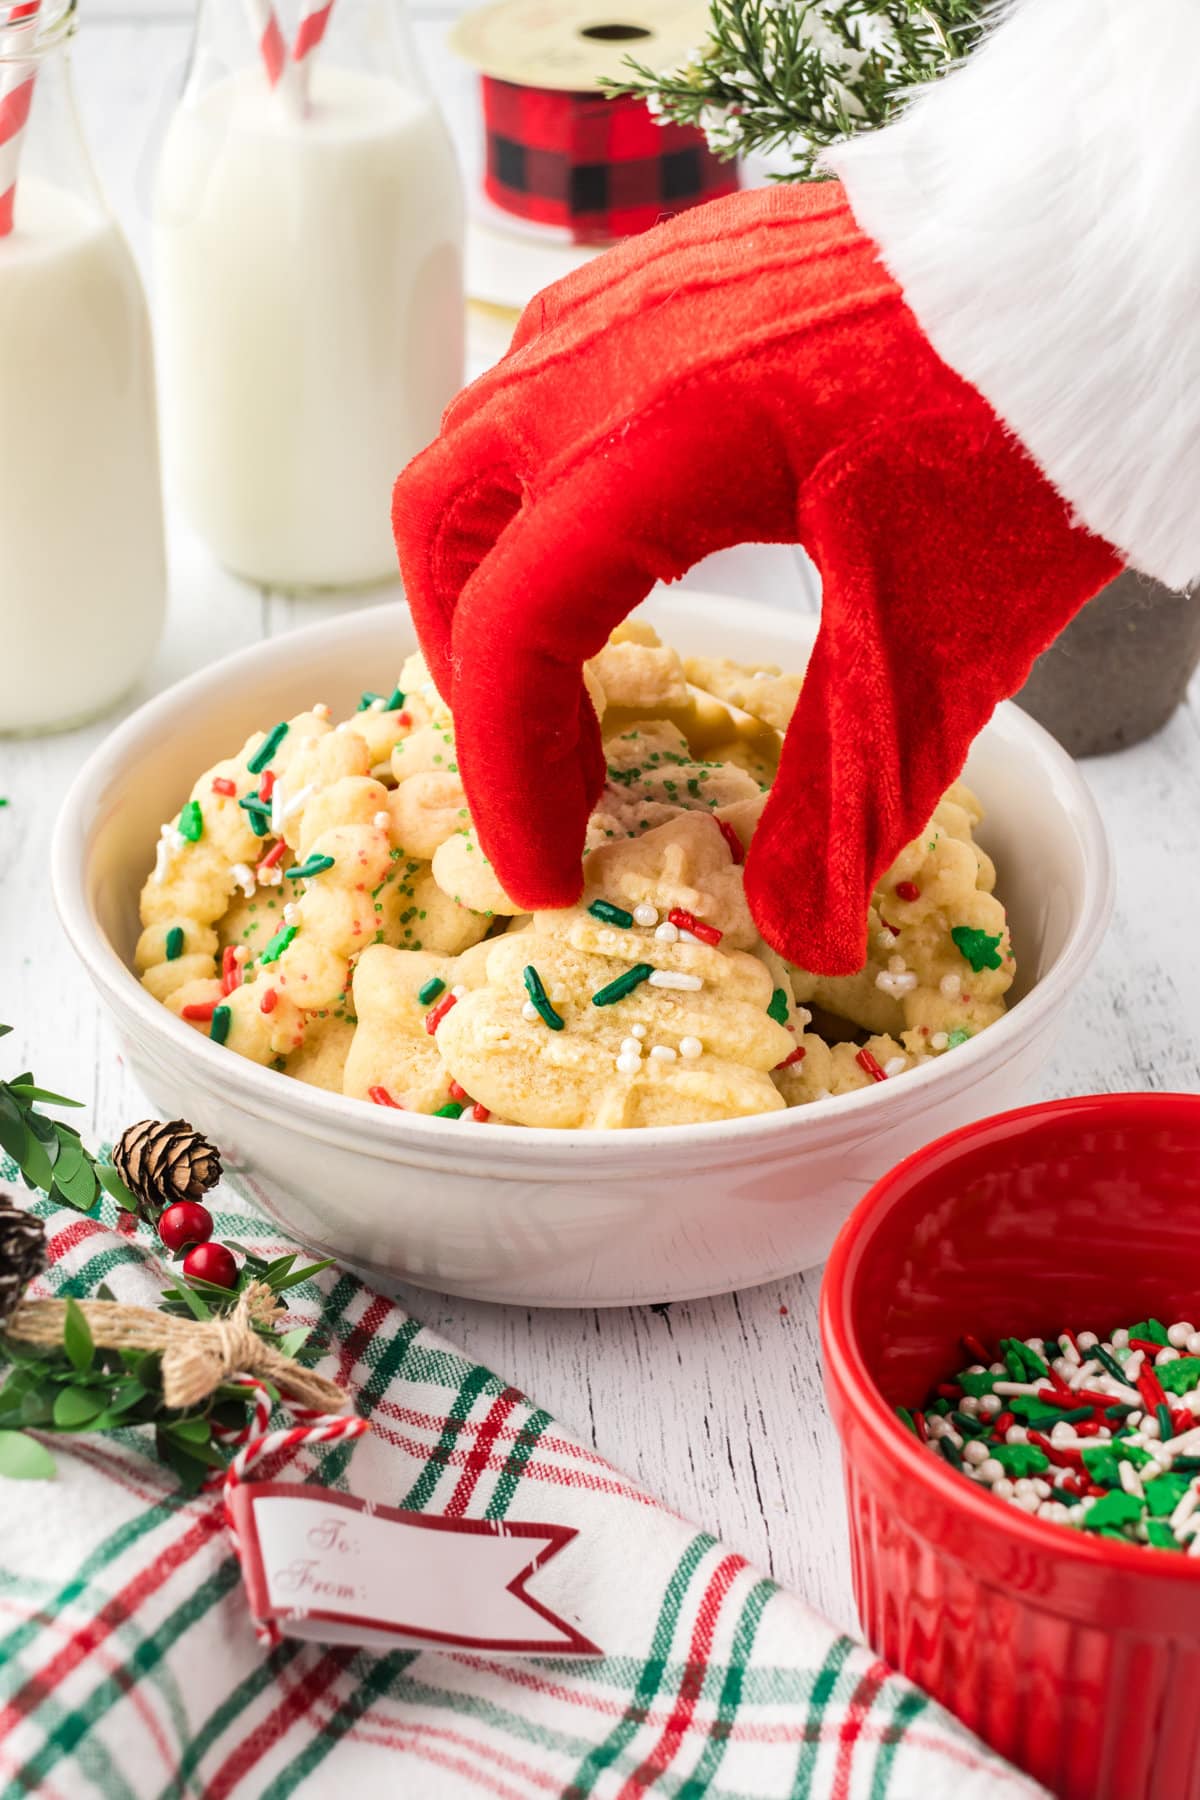 Santa's red glove reaching into a bowl full of sprinkled Spritz cookies.